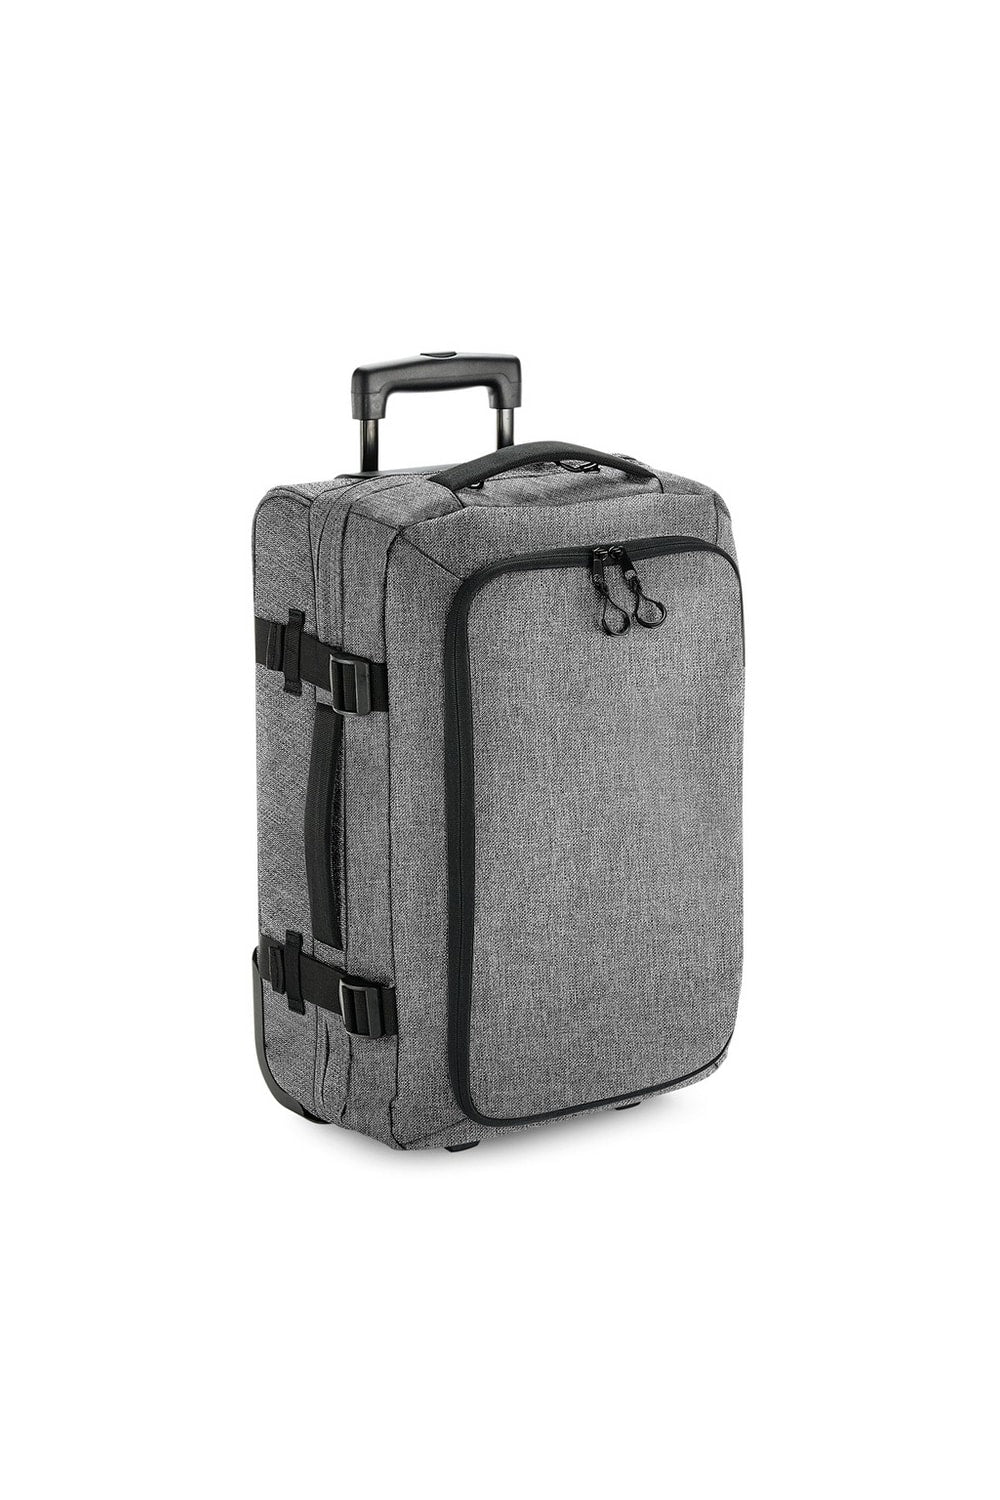 BagBase Unisex Escape Carry-On Wheelie Bag (Gray Marl) (One Size)